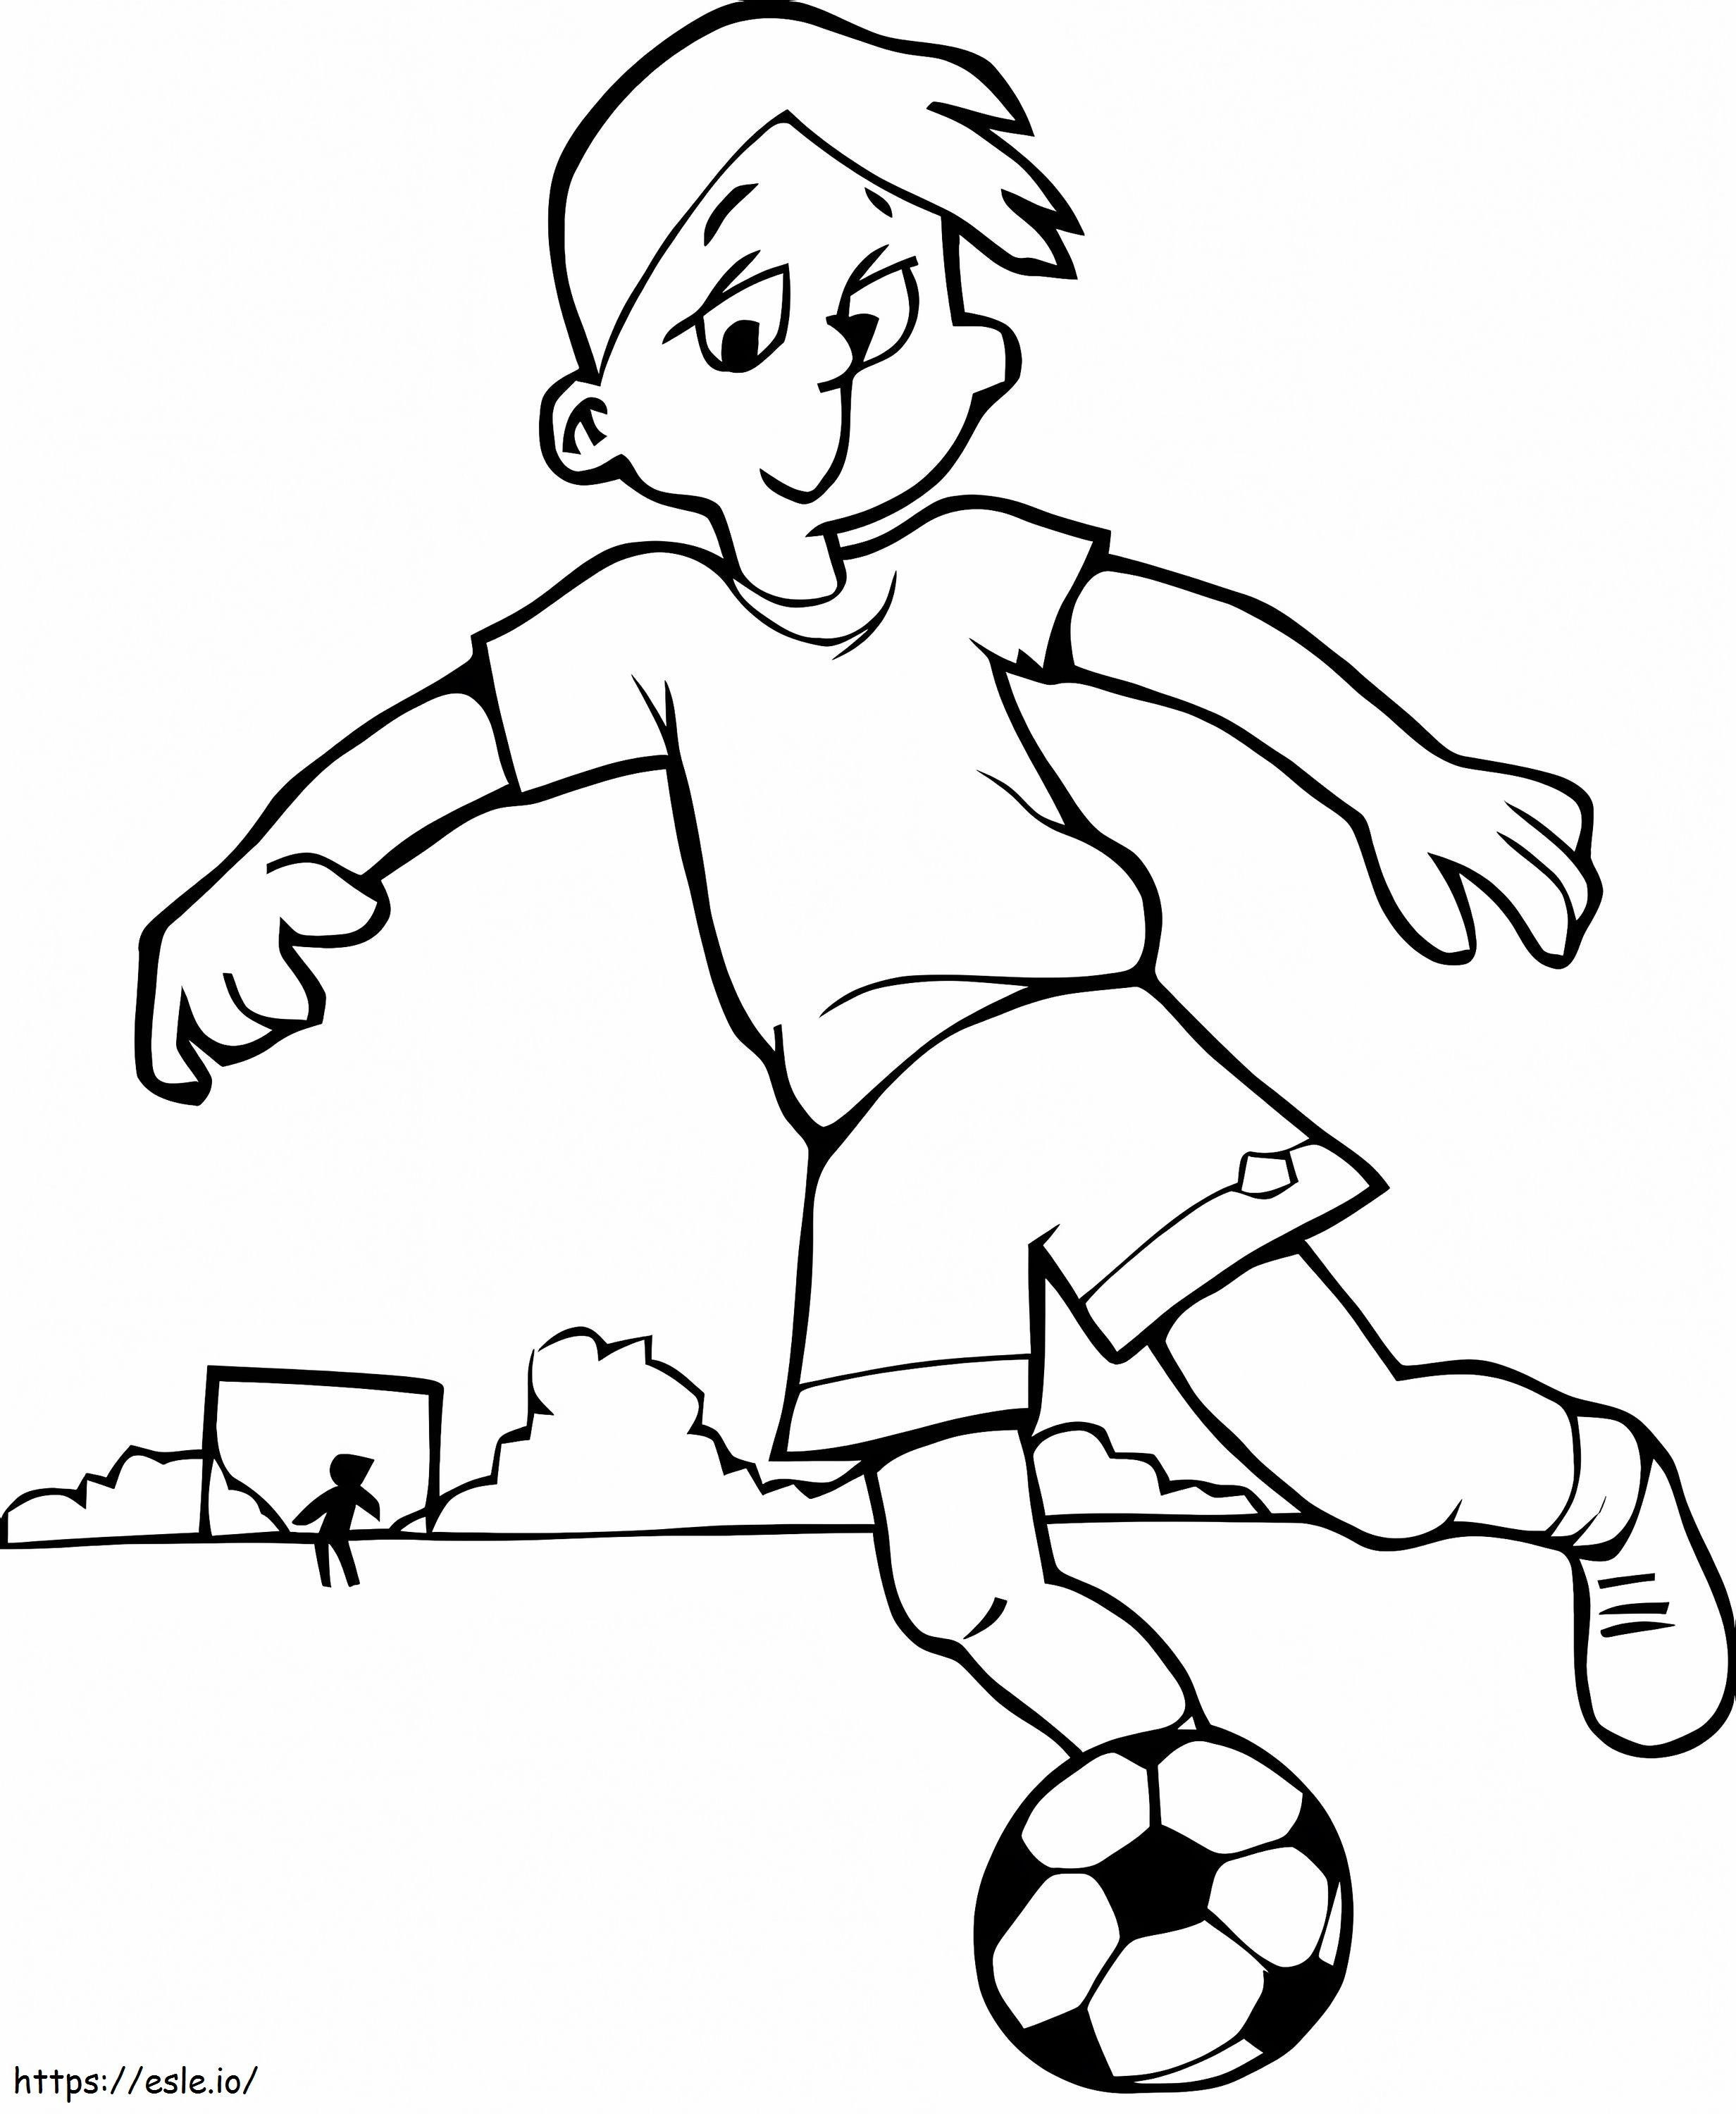 Coloring For Kids Soccer 9840 coloring page